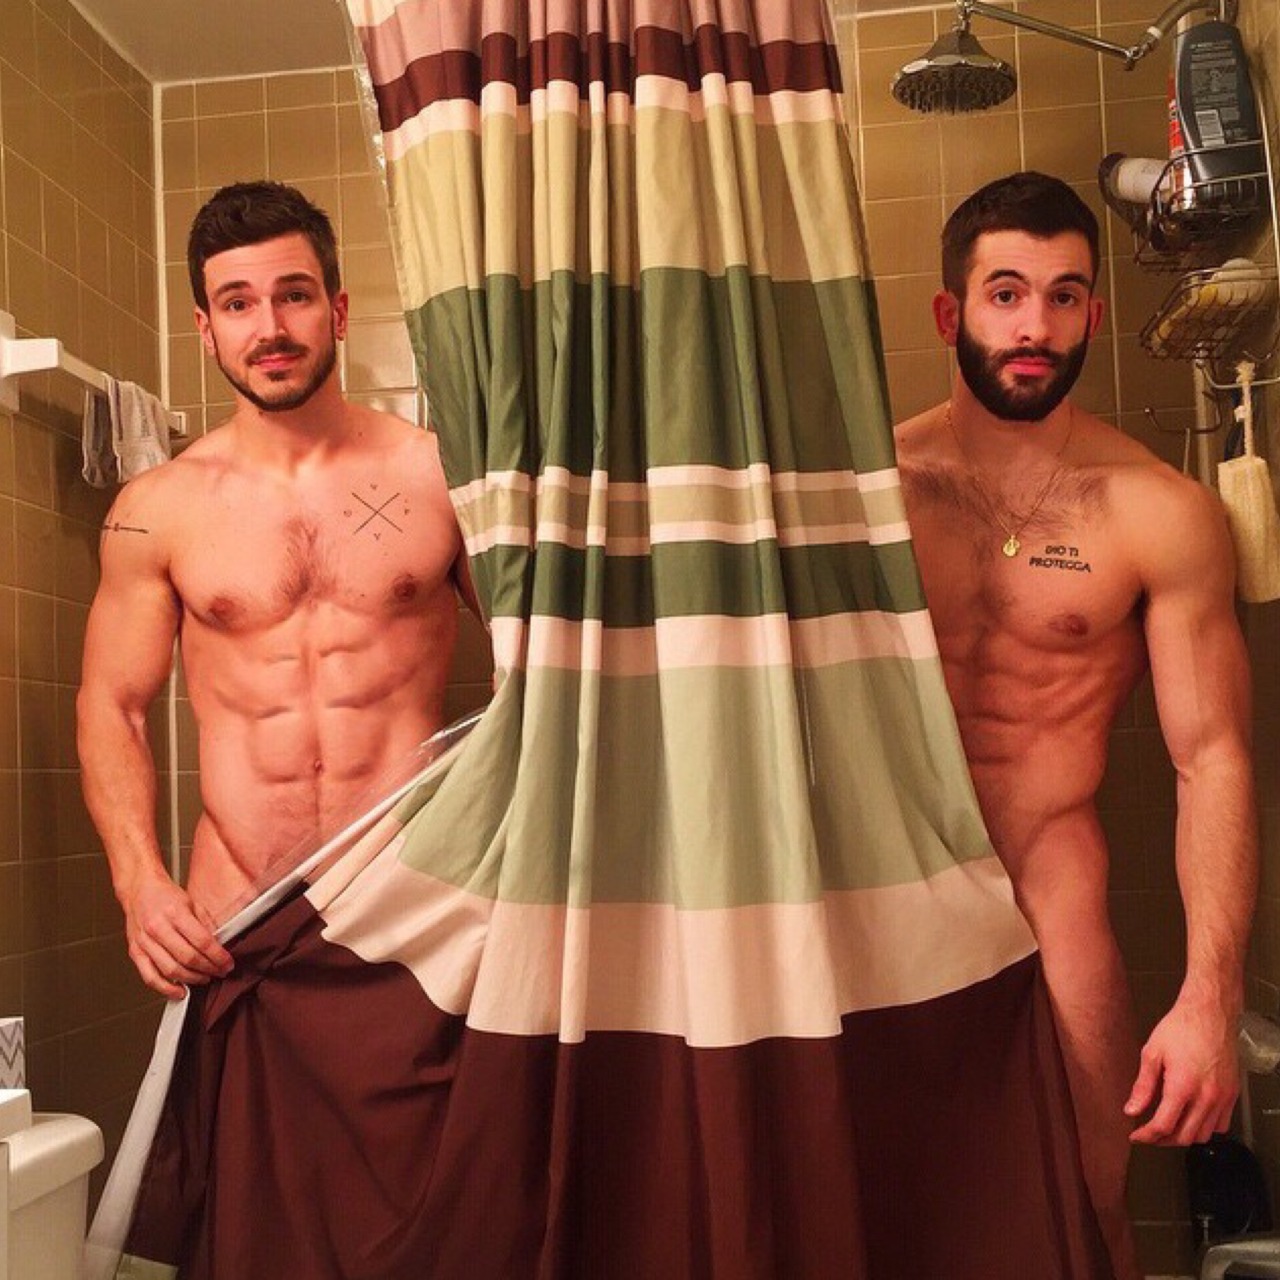 pecstacular:  Meet swolemates and partners Justin and Nick. You’ve seen their sexy